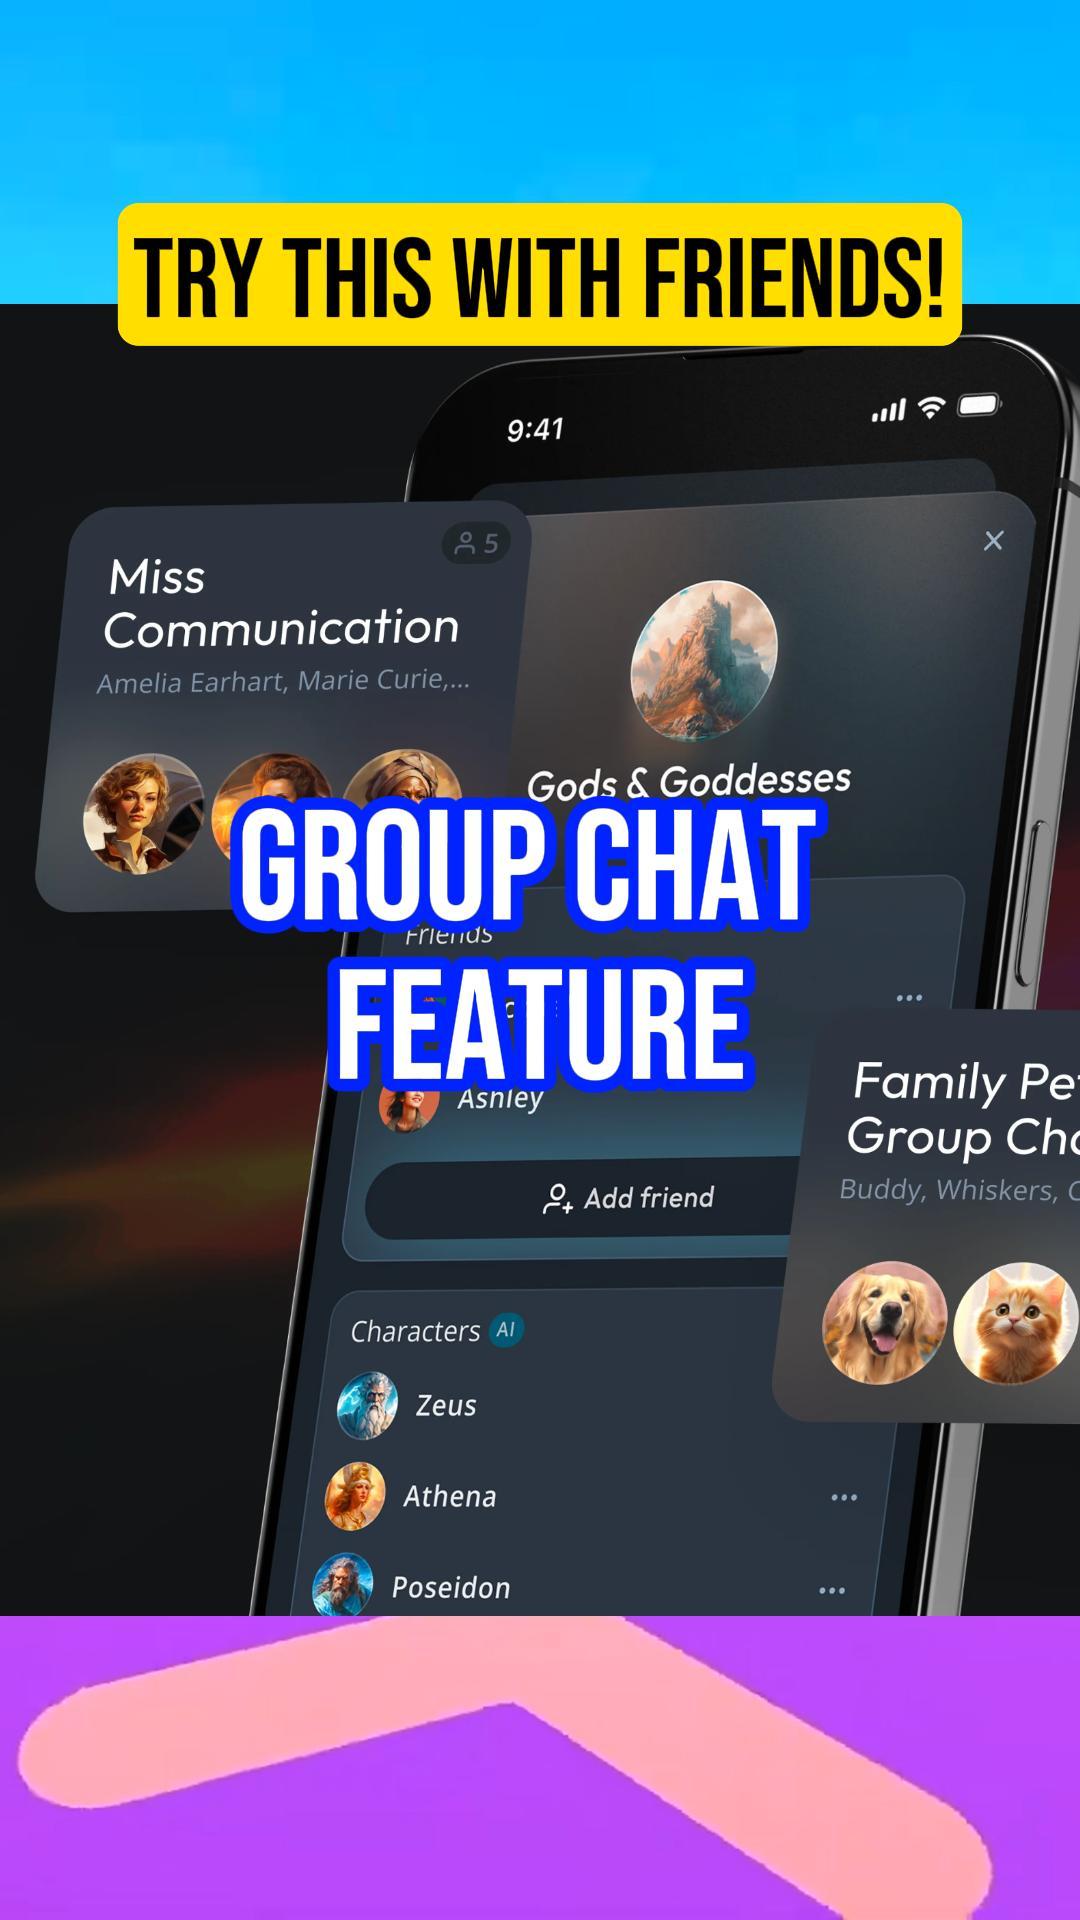 Try this for your next Dungeons & Dragons (DnD) game! Character.AI is launching the Character Group Chat feature, enabling users to chat with multiple AI companions simultaneously, enhancing collaborative conversations and brainstorming with friends.